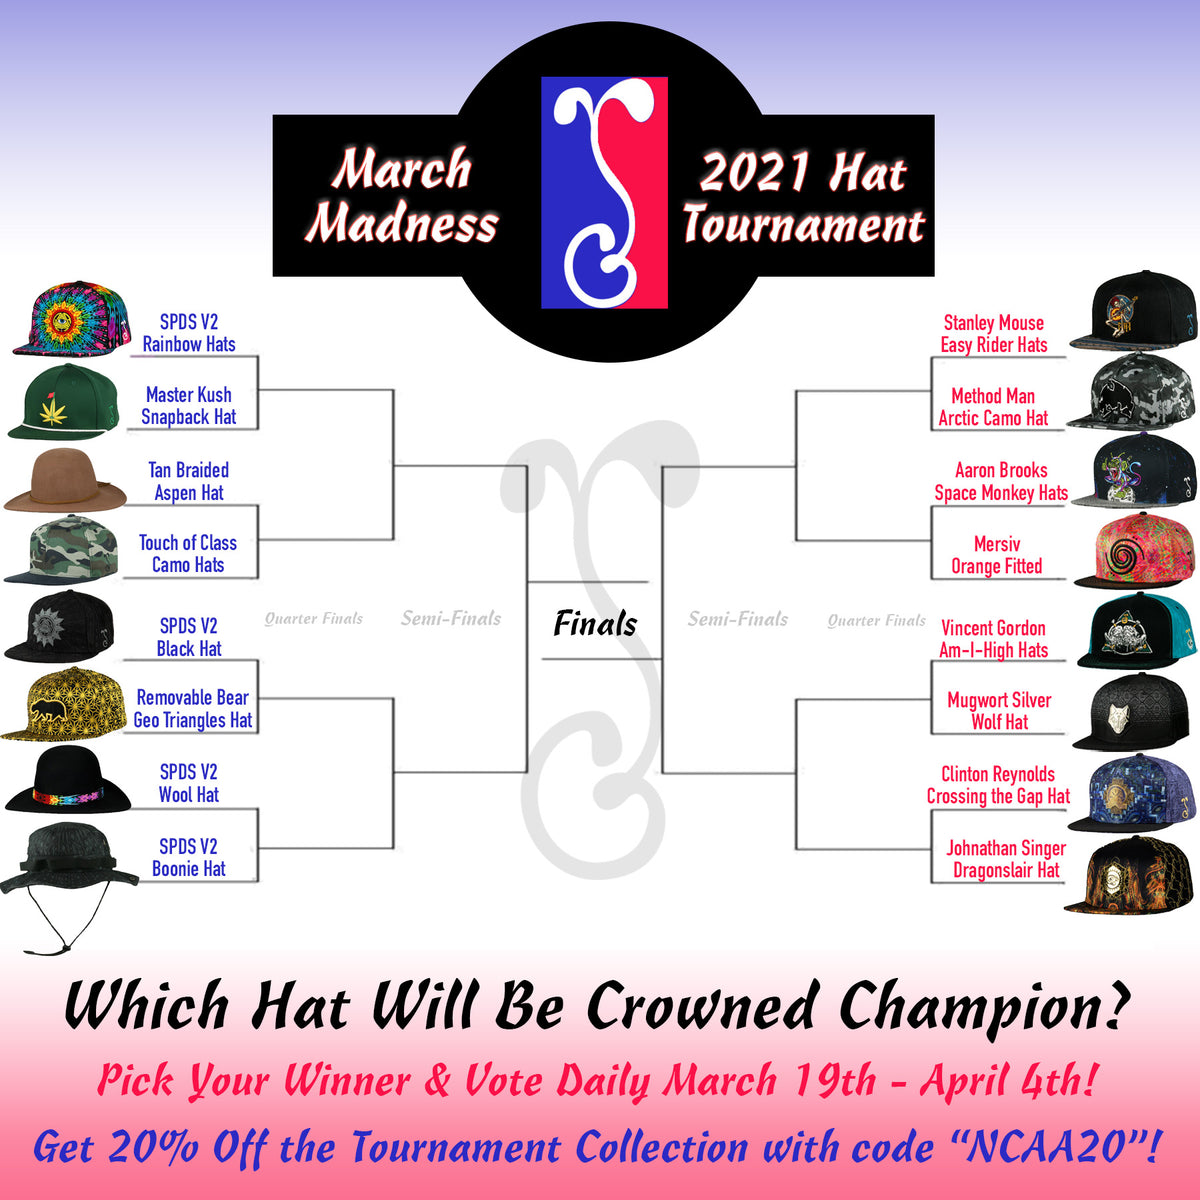 GRC's March Madness Hat Tournament Returns in 2021